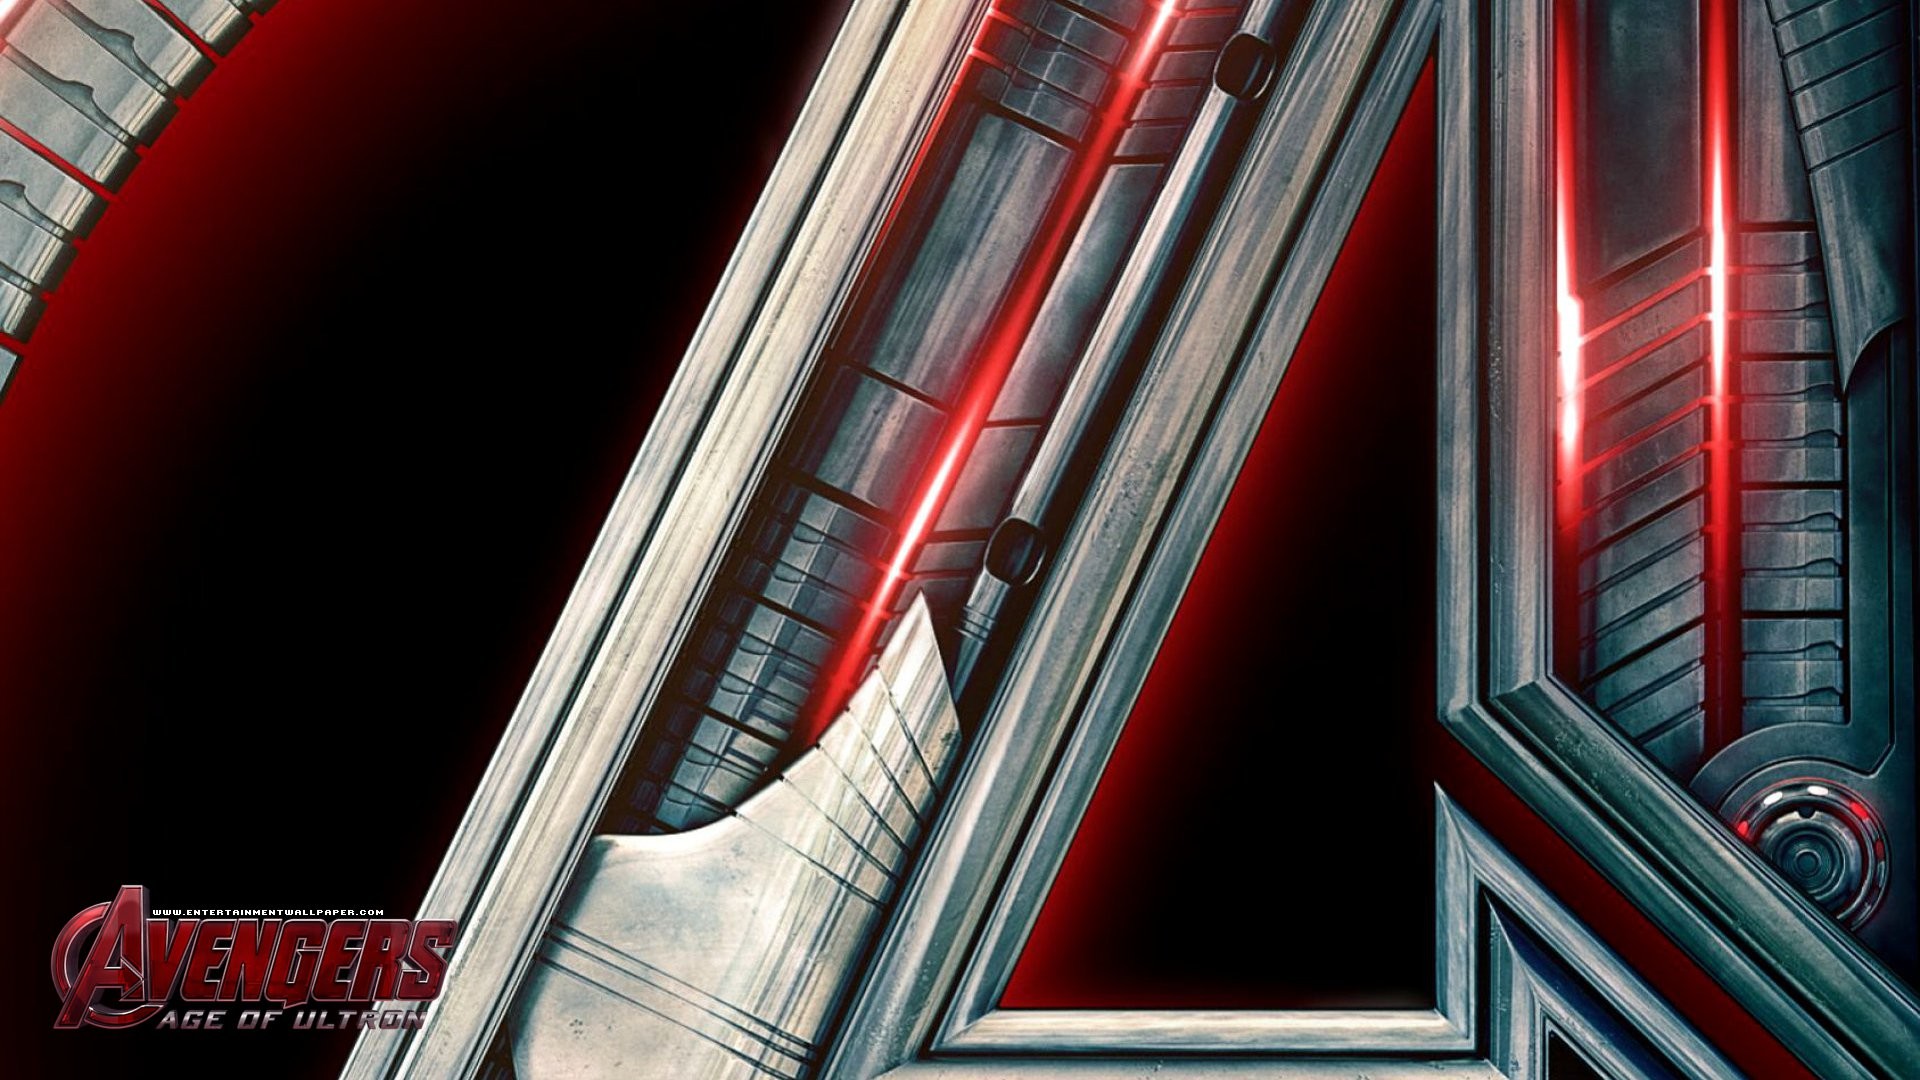 Avengers: Age of Ultron Wallpaper – Original size, download now.